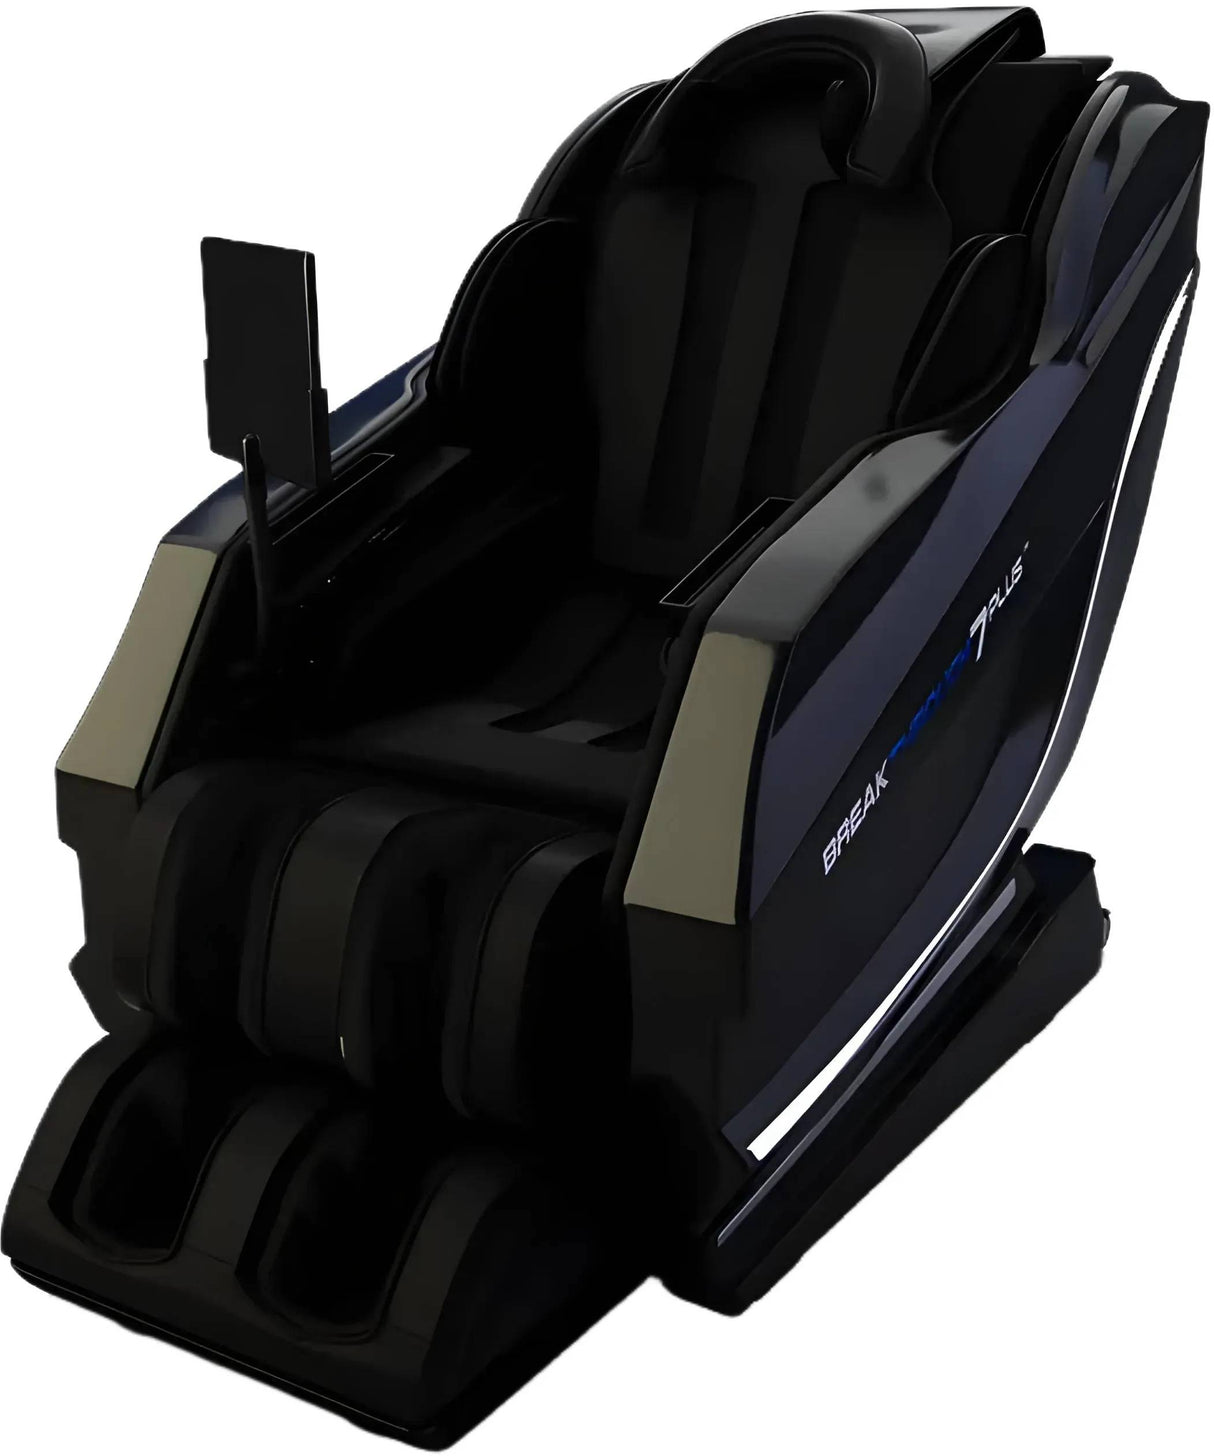 ZiahCare's Medical Breakthrough 7 Plus Massage Chair Mockup Image 6